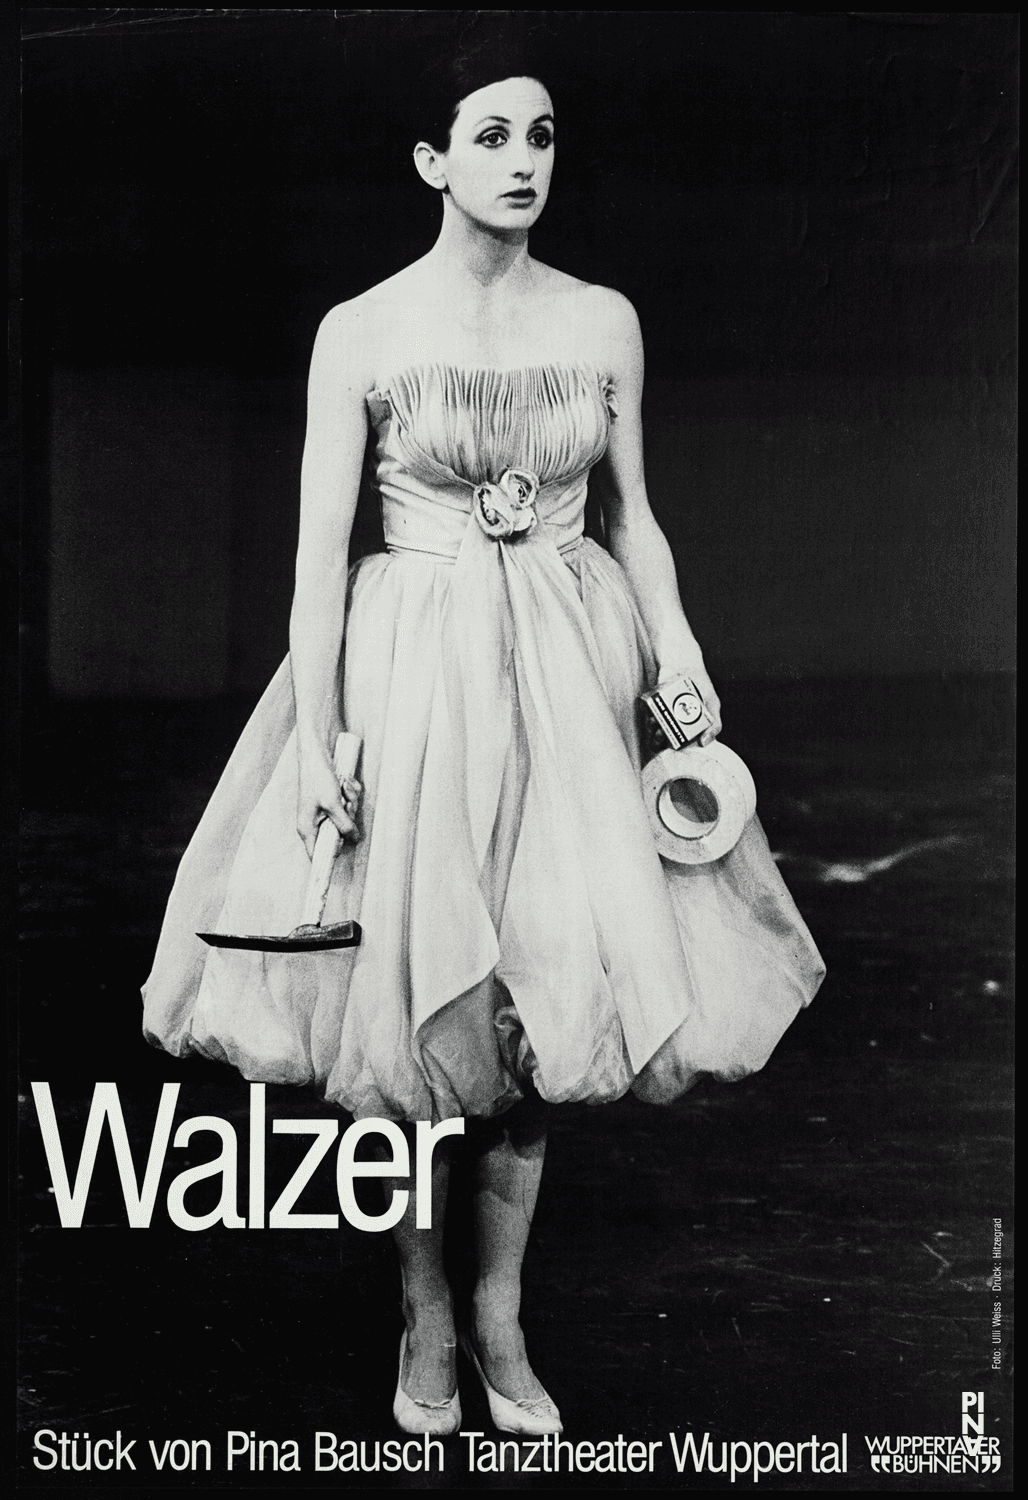 Poster for “Walzer” by Pina Bausch